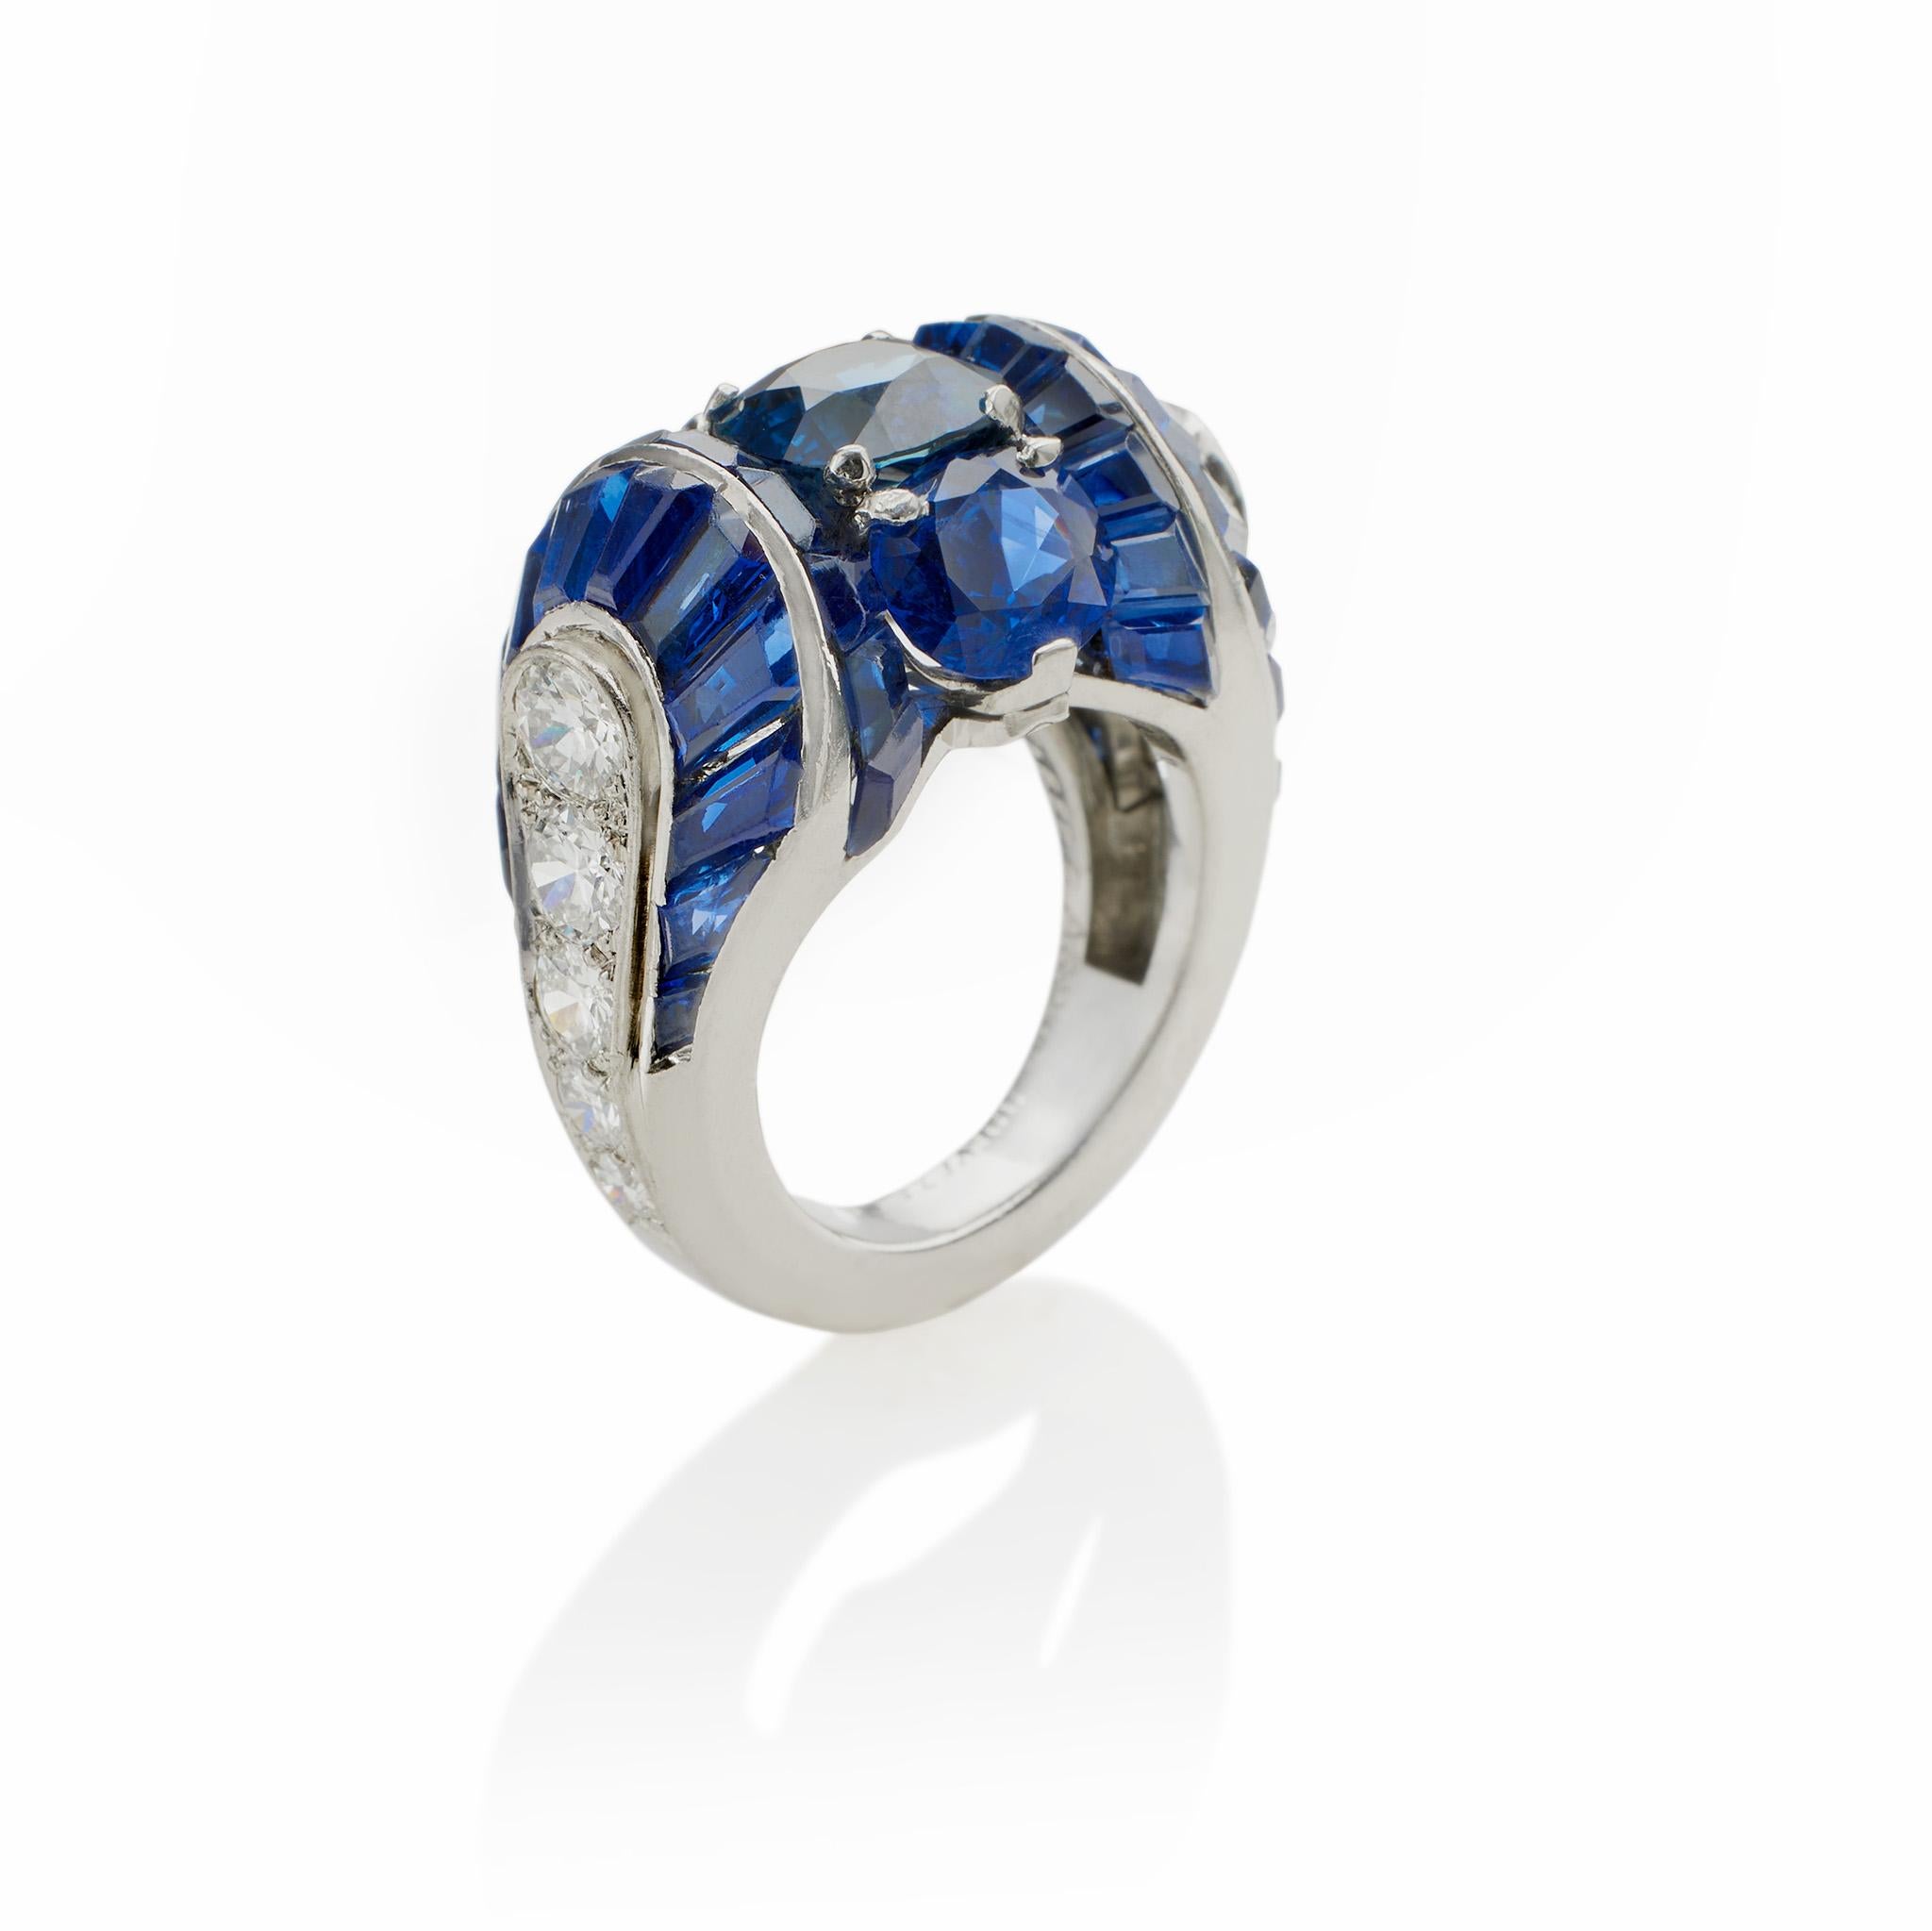 Created in the late 1930s by Van Cleef & Arpels Paris, this Burma sapphire and diamond ring is mounted in platinum. The ring centers three vertically-set cushion-cut sapphires, weighing 1.96, 1.21, and 1.20 carats, flanked by two canted rows of